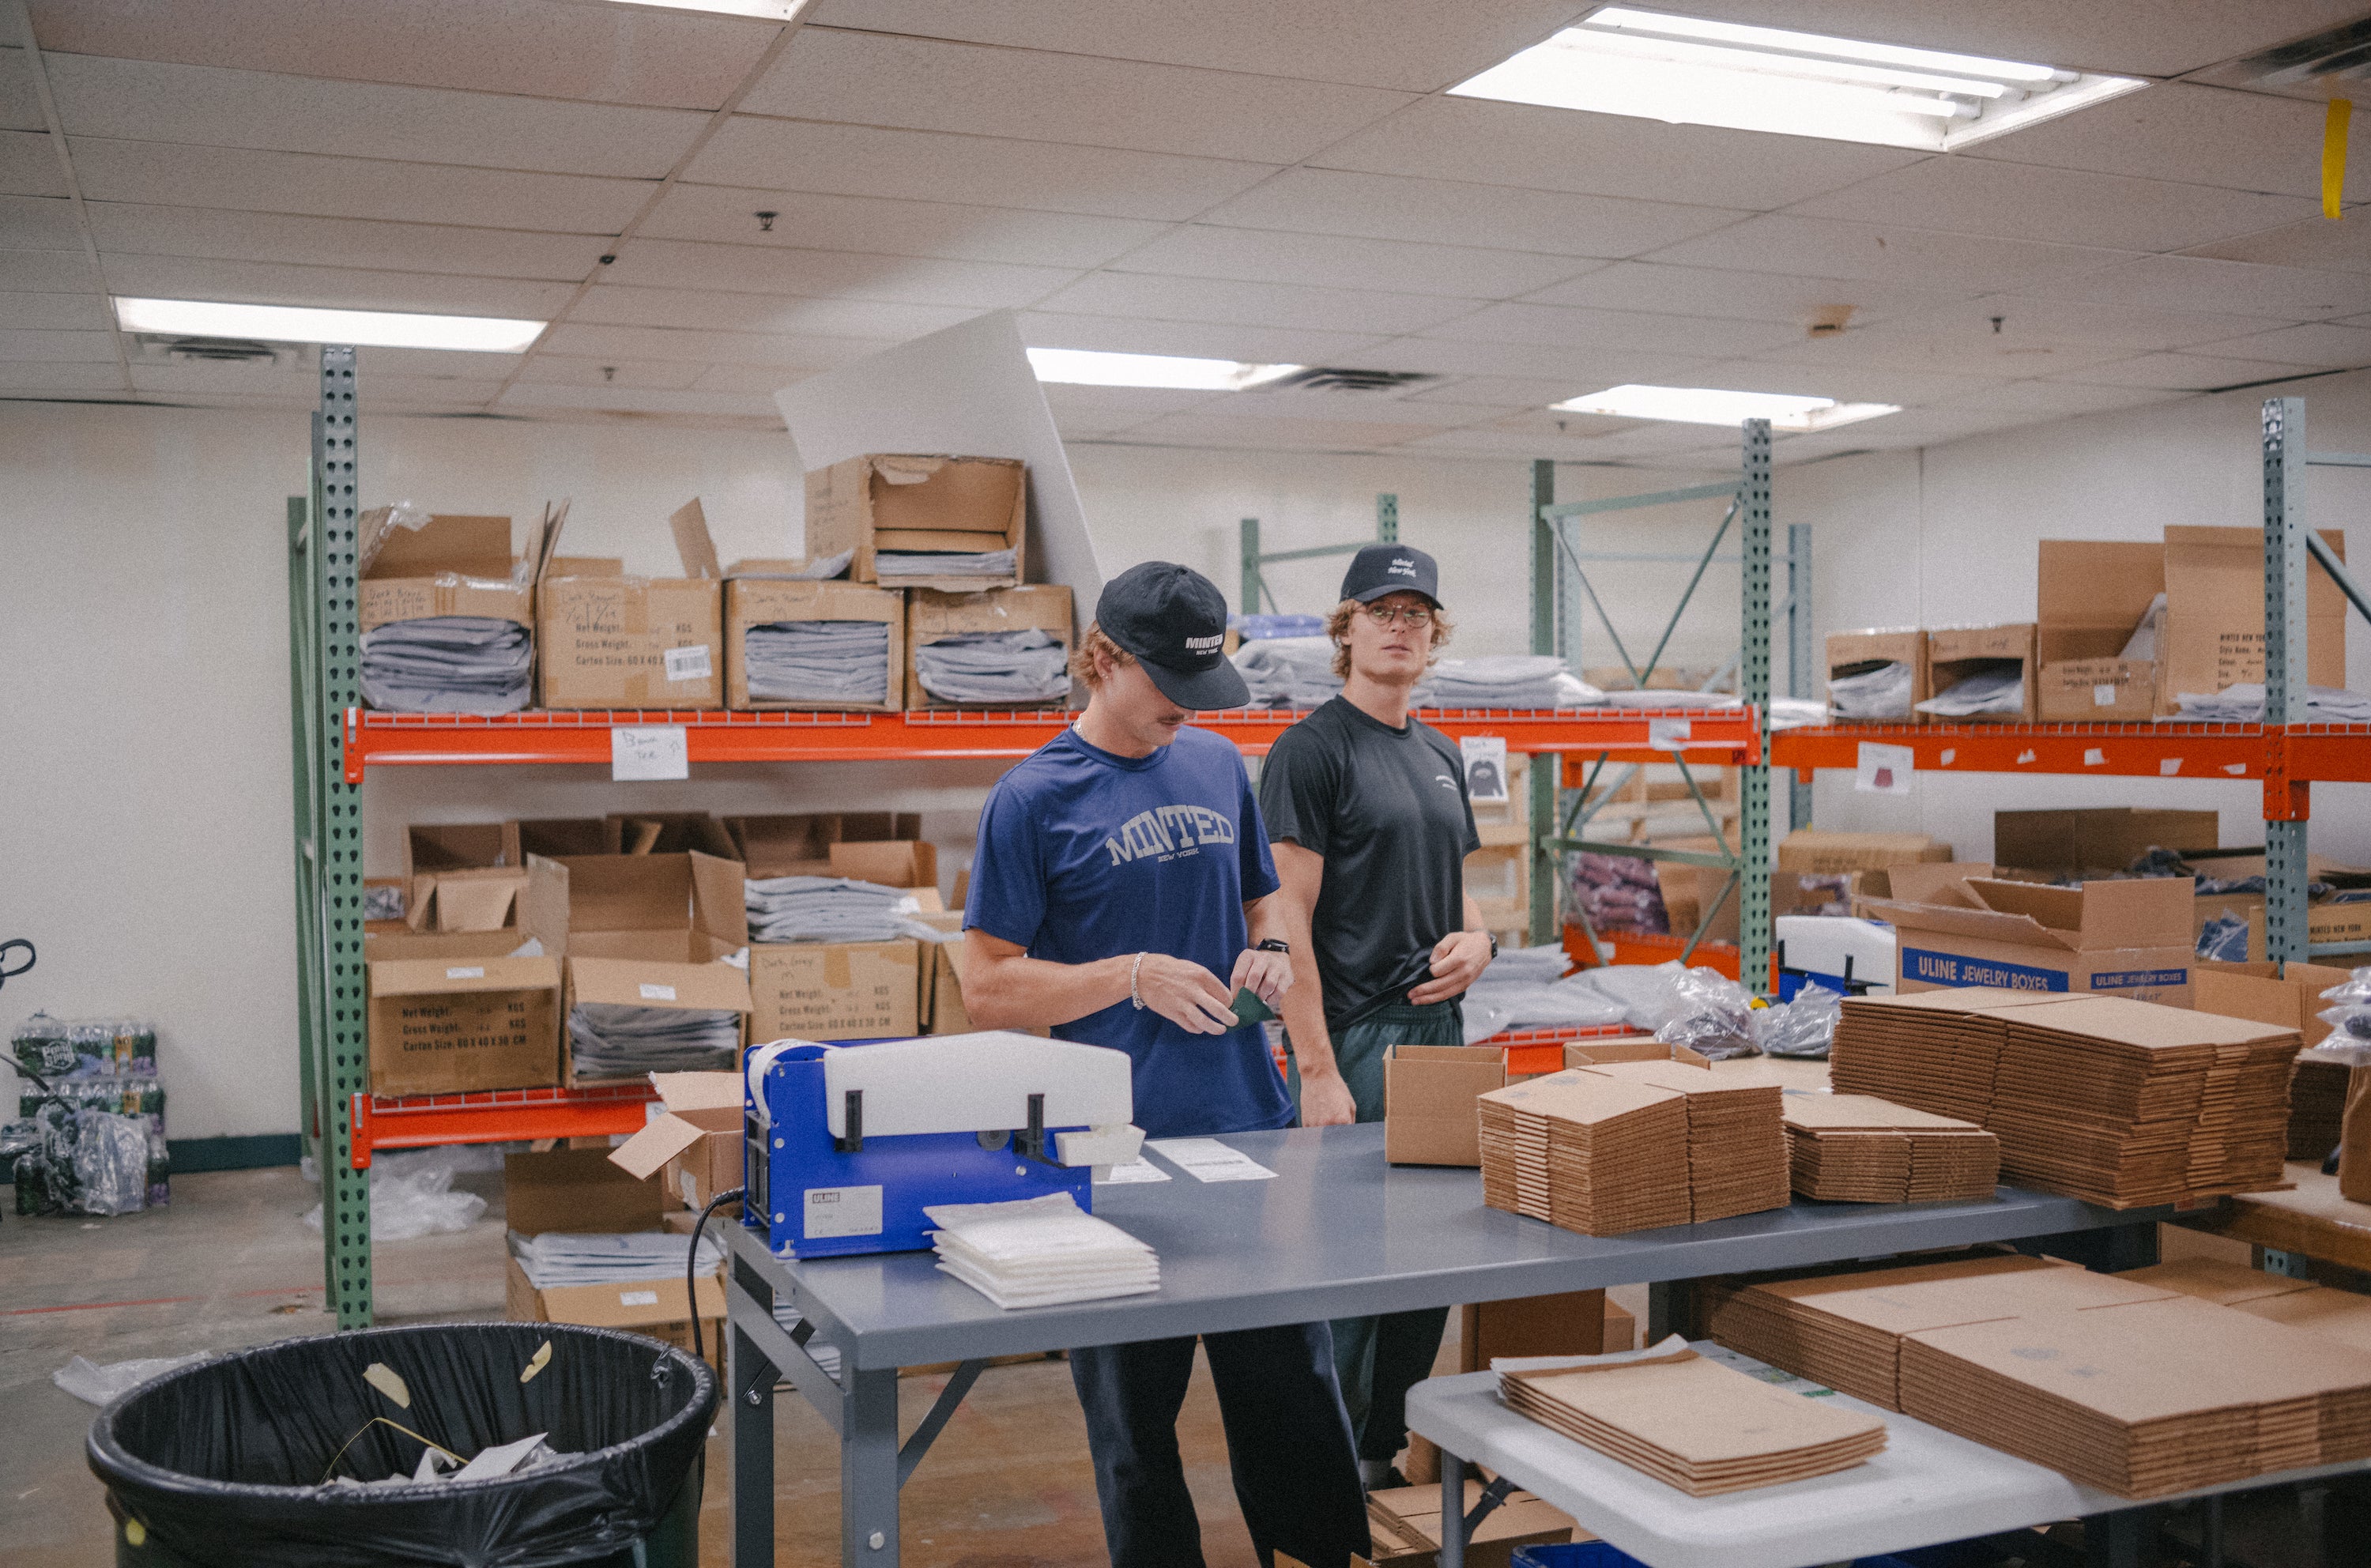 Marcus and his team at the Minted New York warehouse packing boxes.